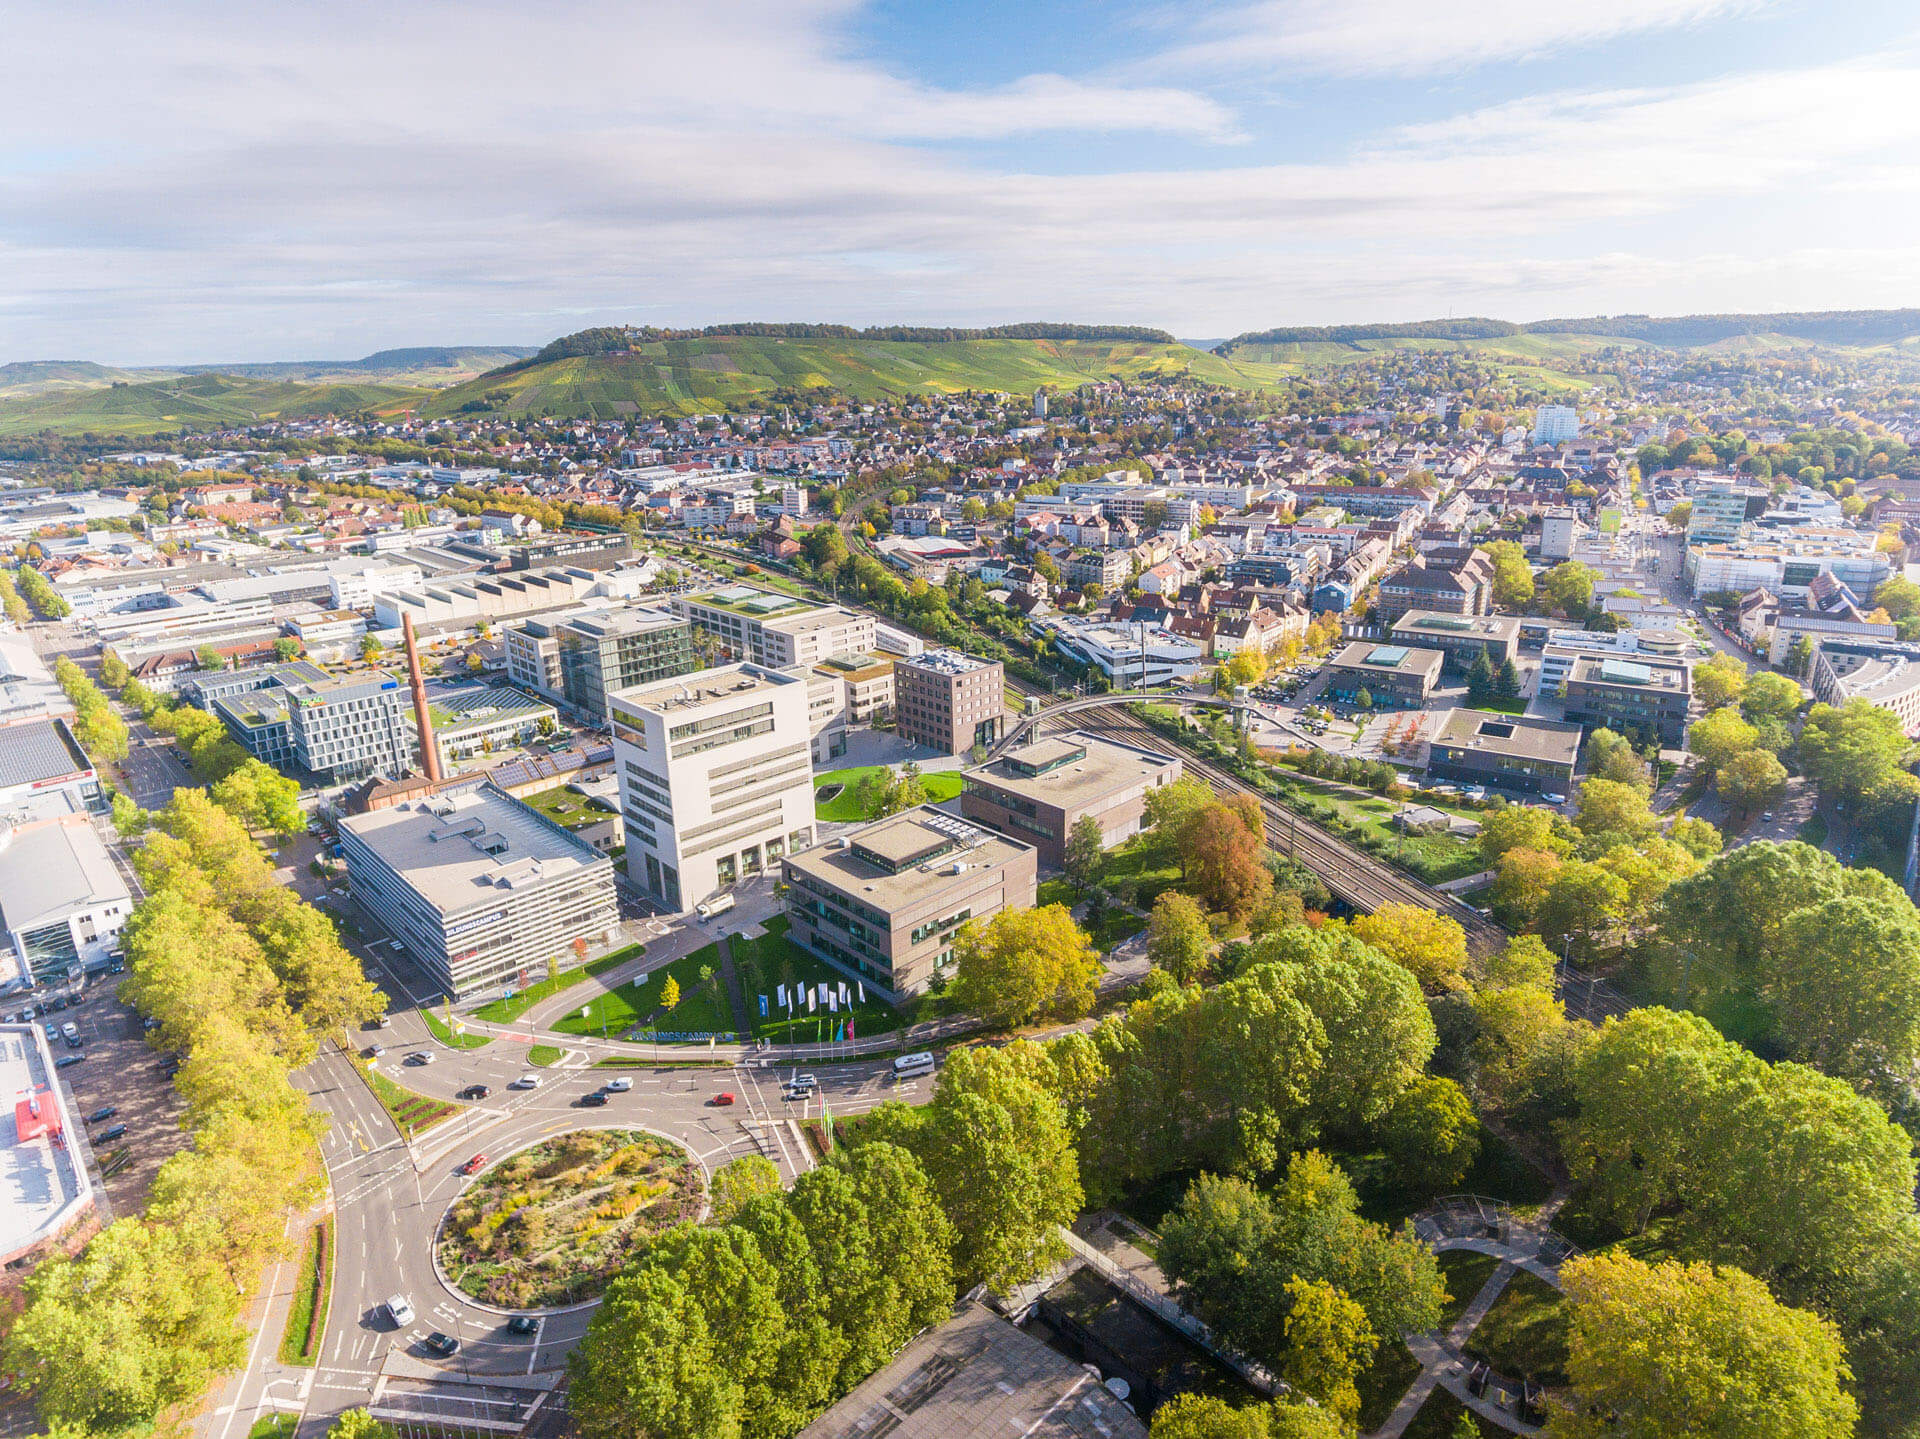 Drone shot of the city of Heilbronn with the Bildungscampus in the center